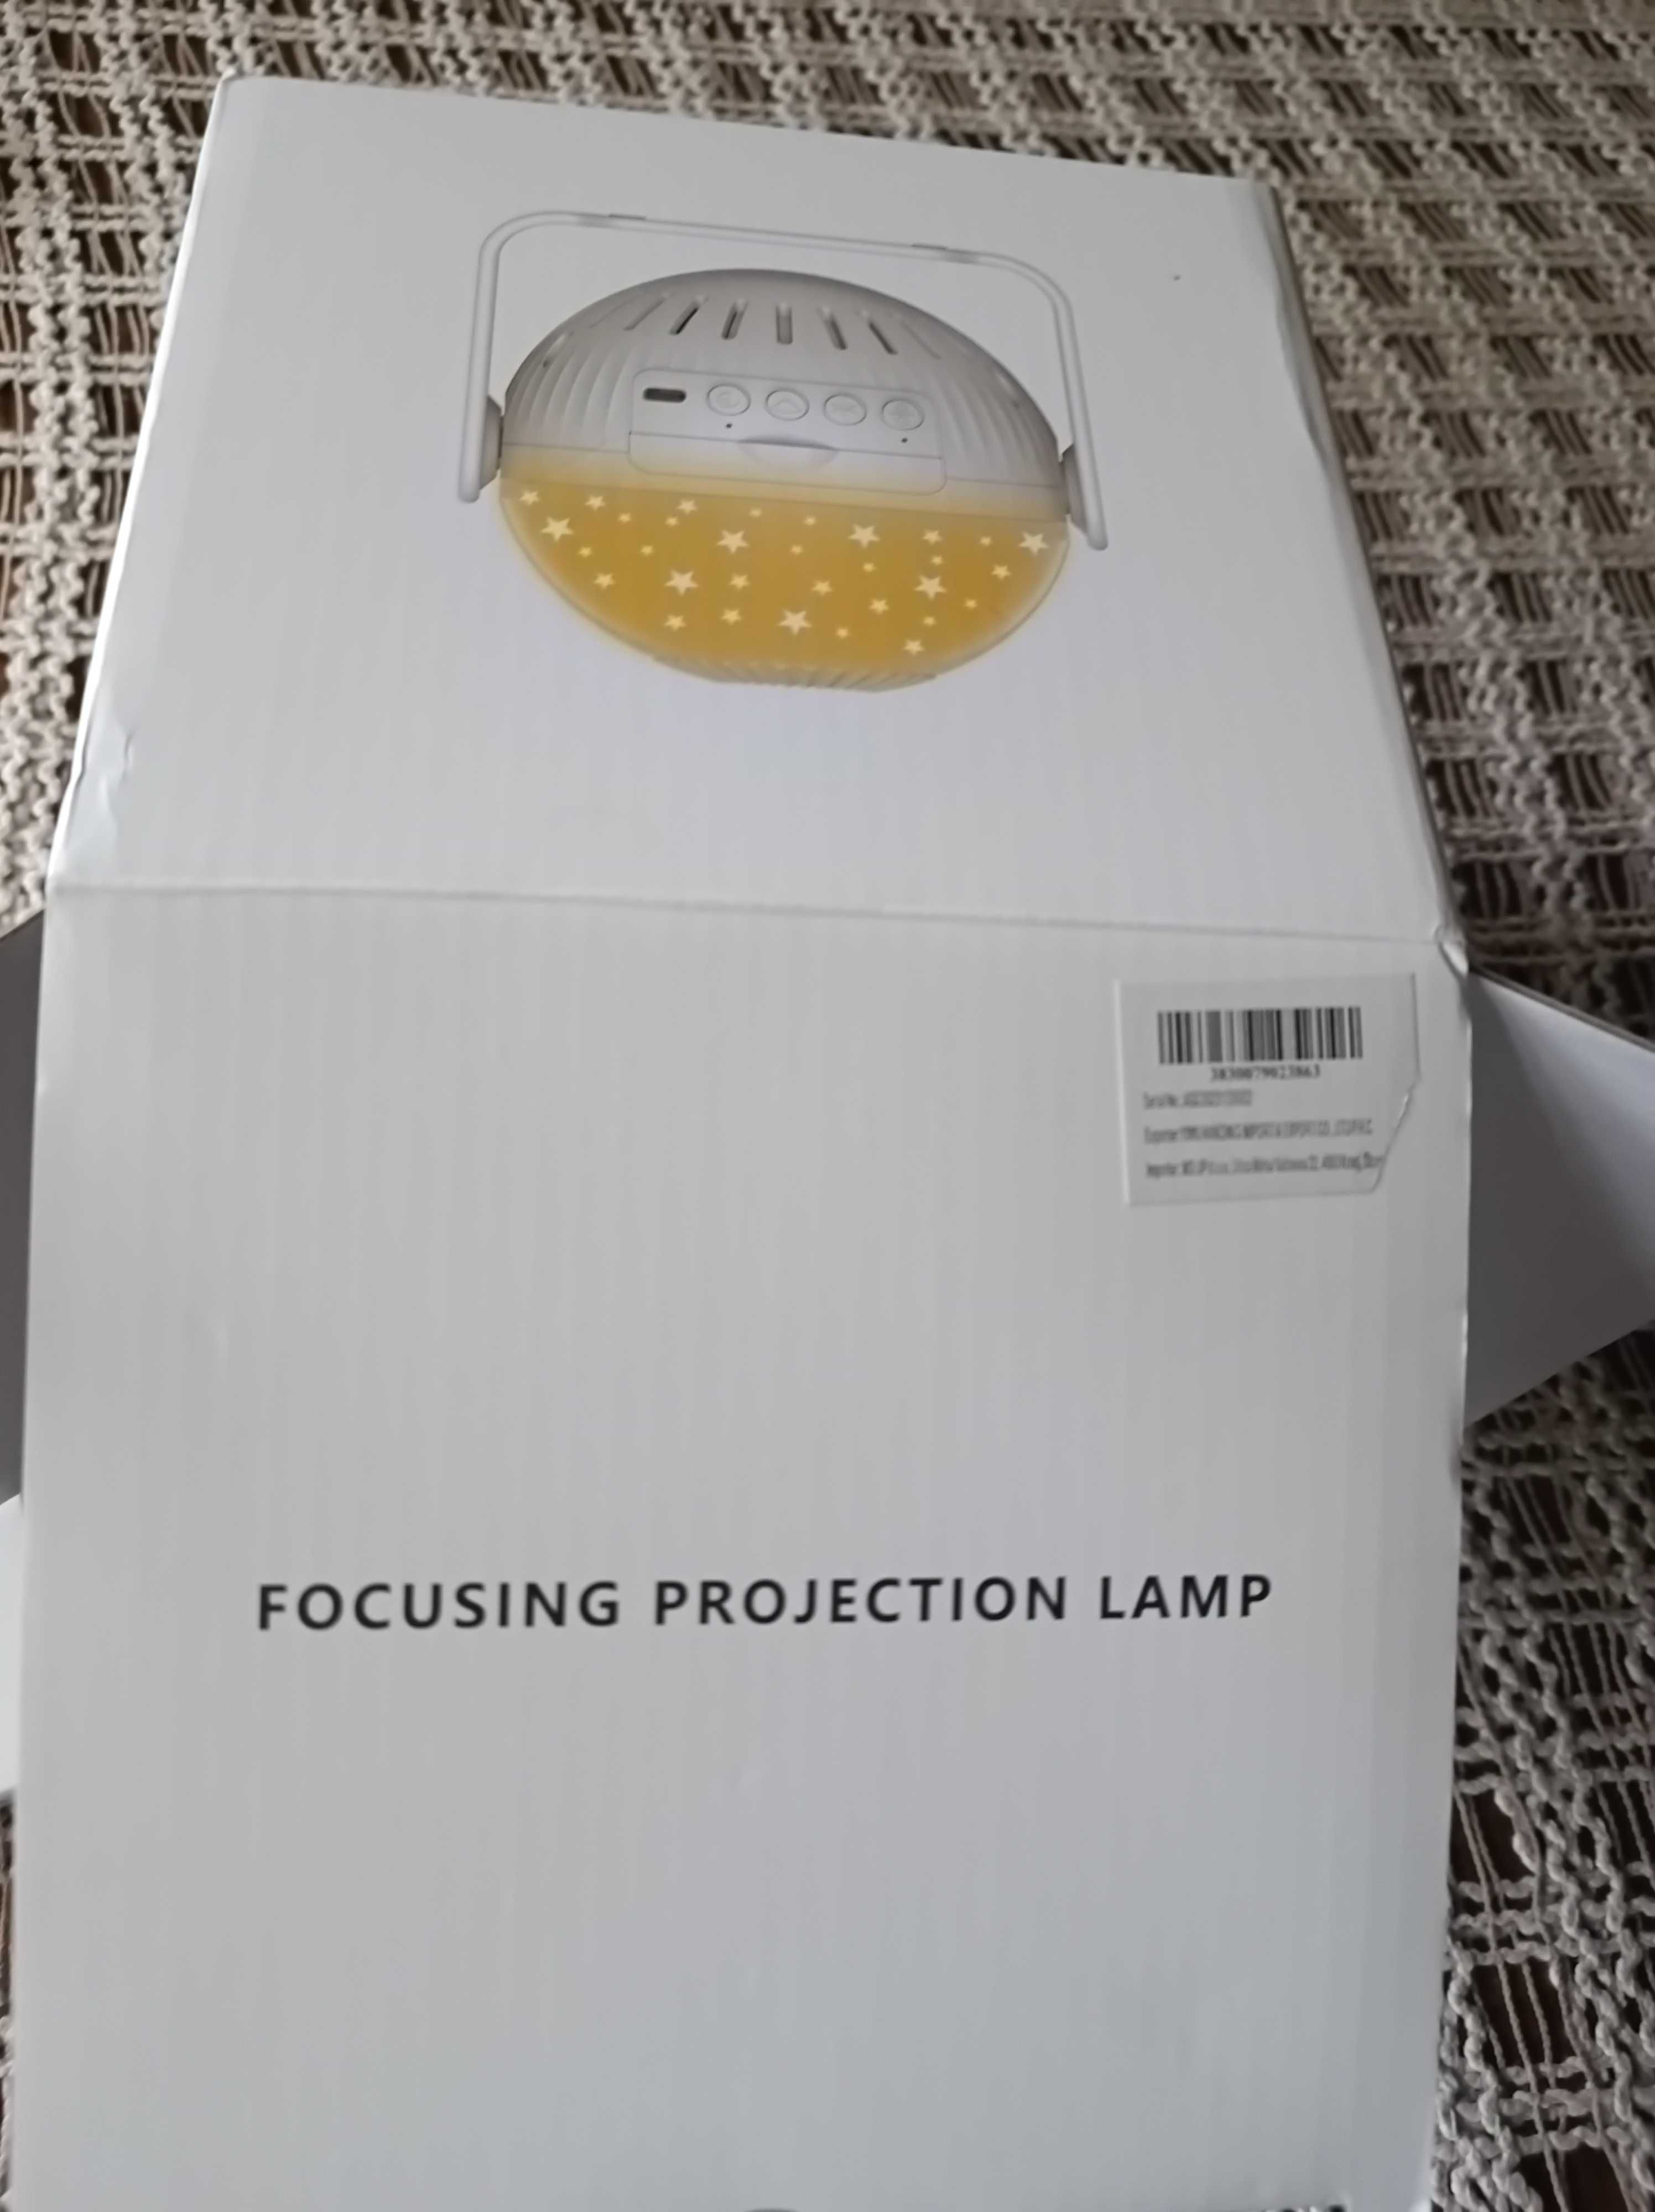 Focusing Projection Lamp